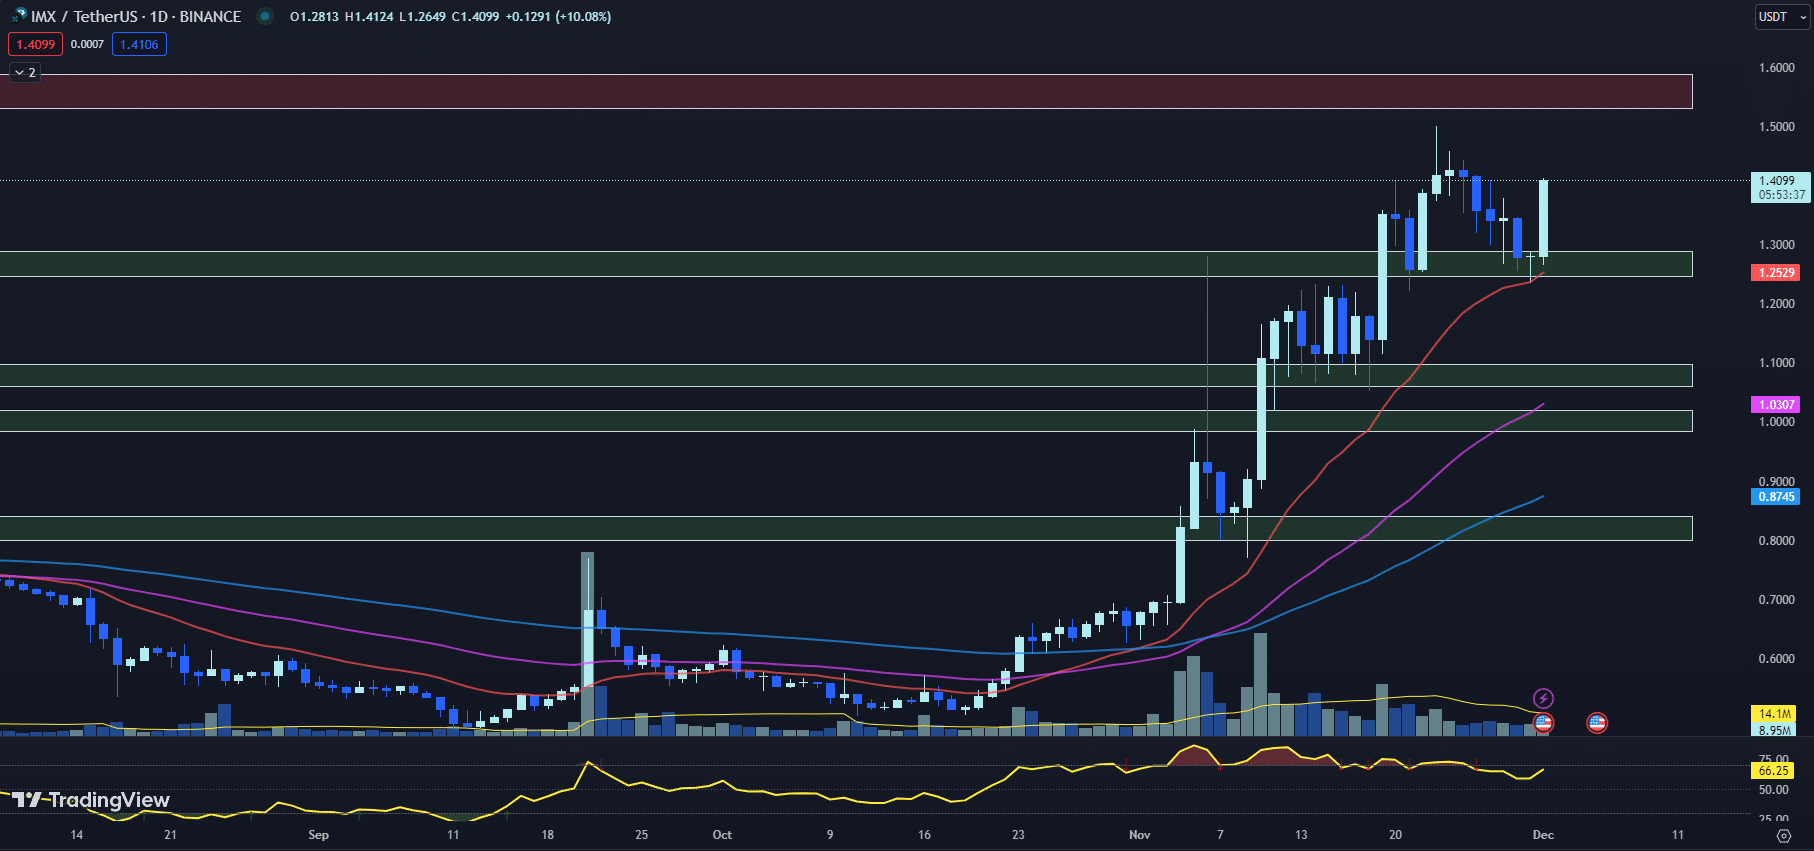 tradingview chart for the imx chart